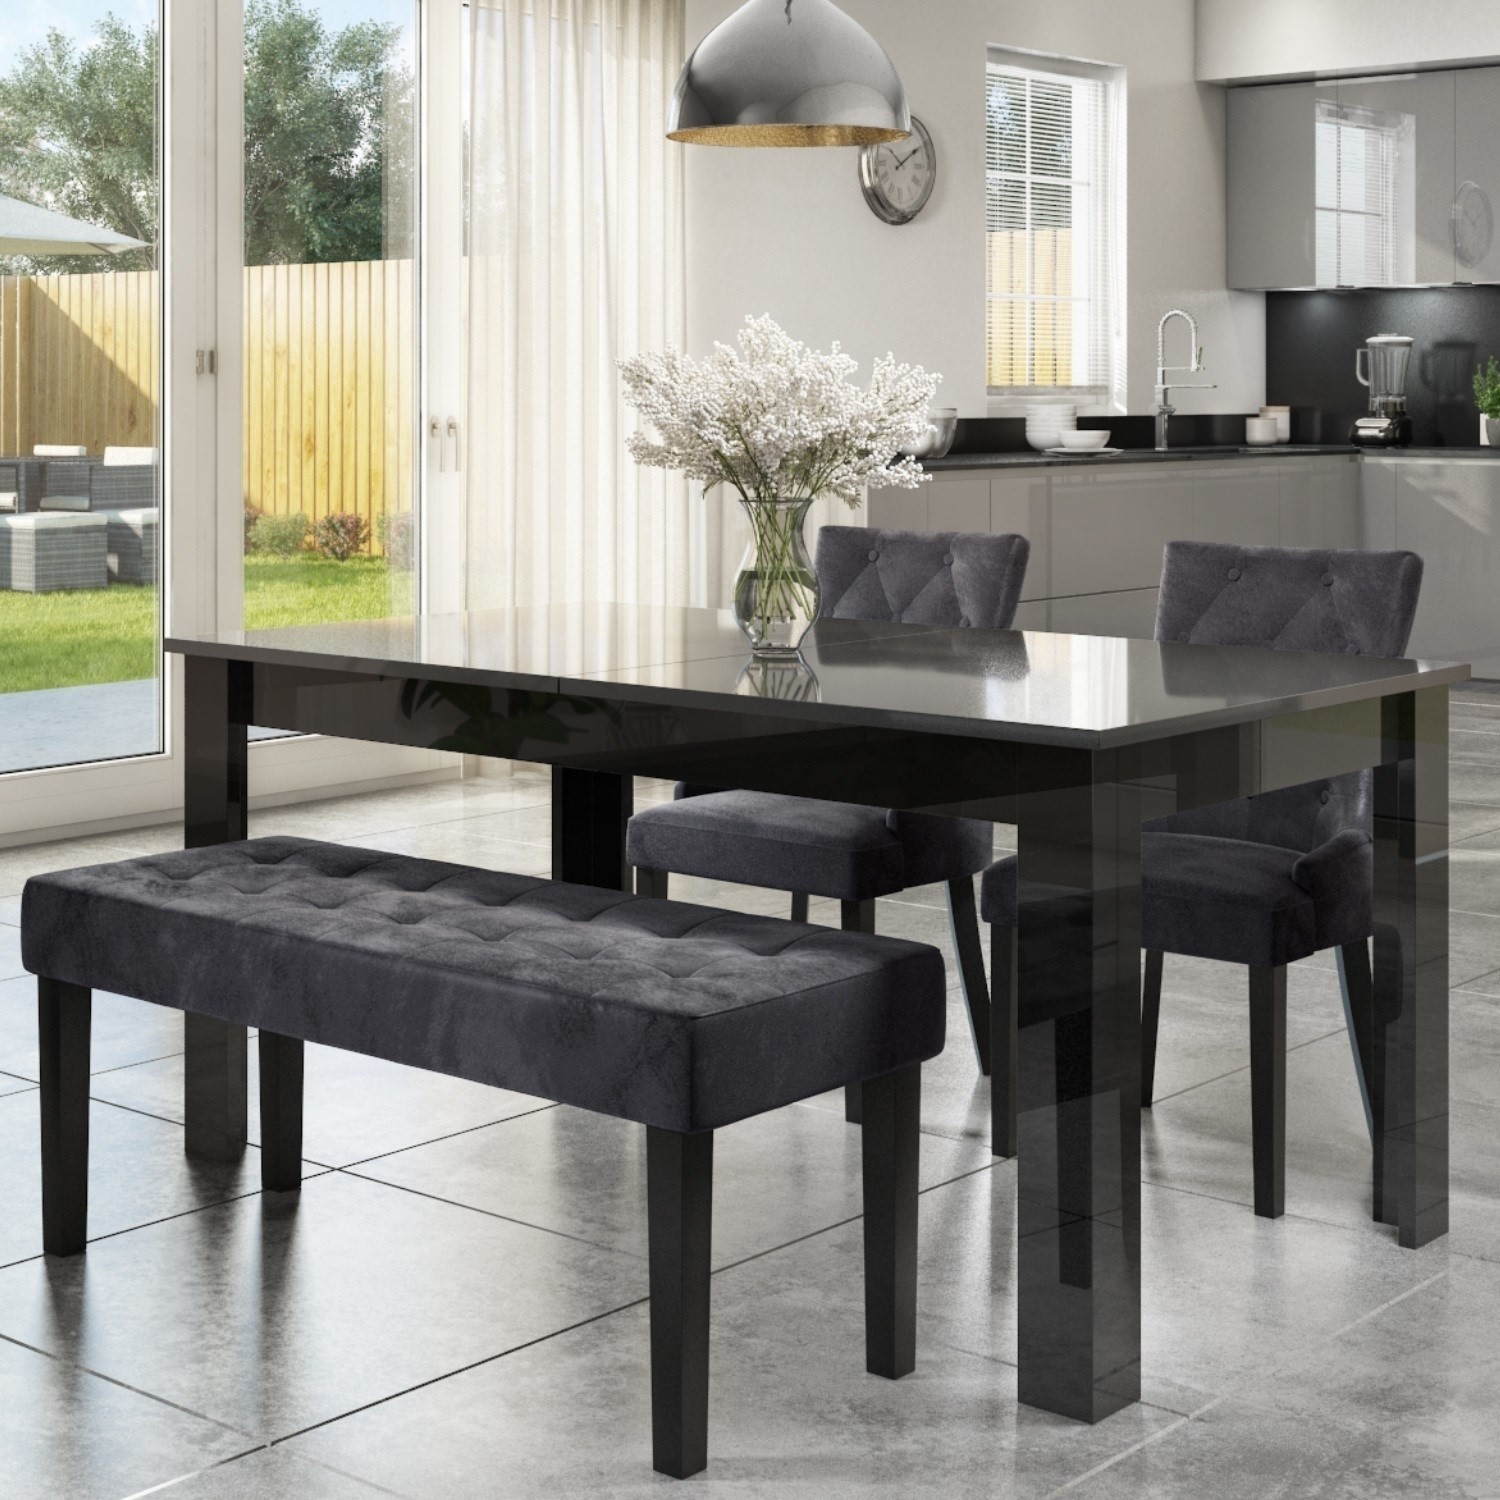 Extendable Dining Table In Black High, Two Tone Gray Dining Room Chairs